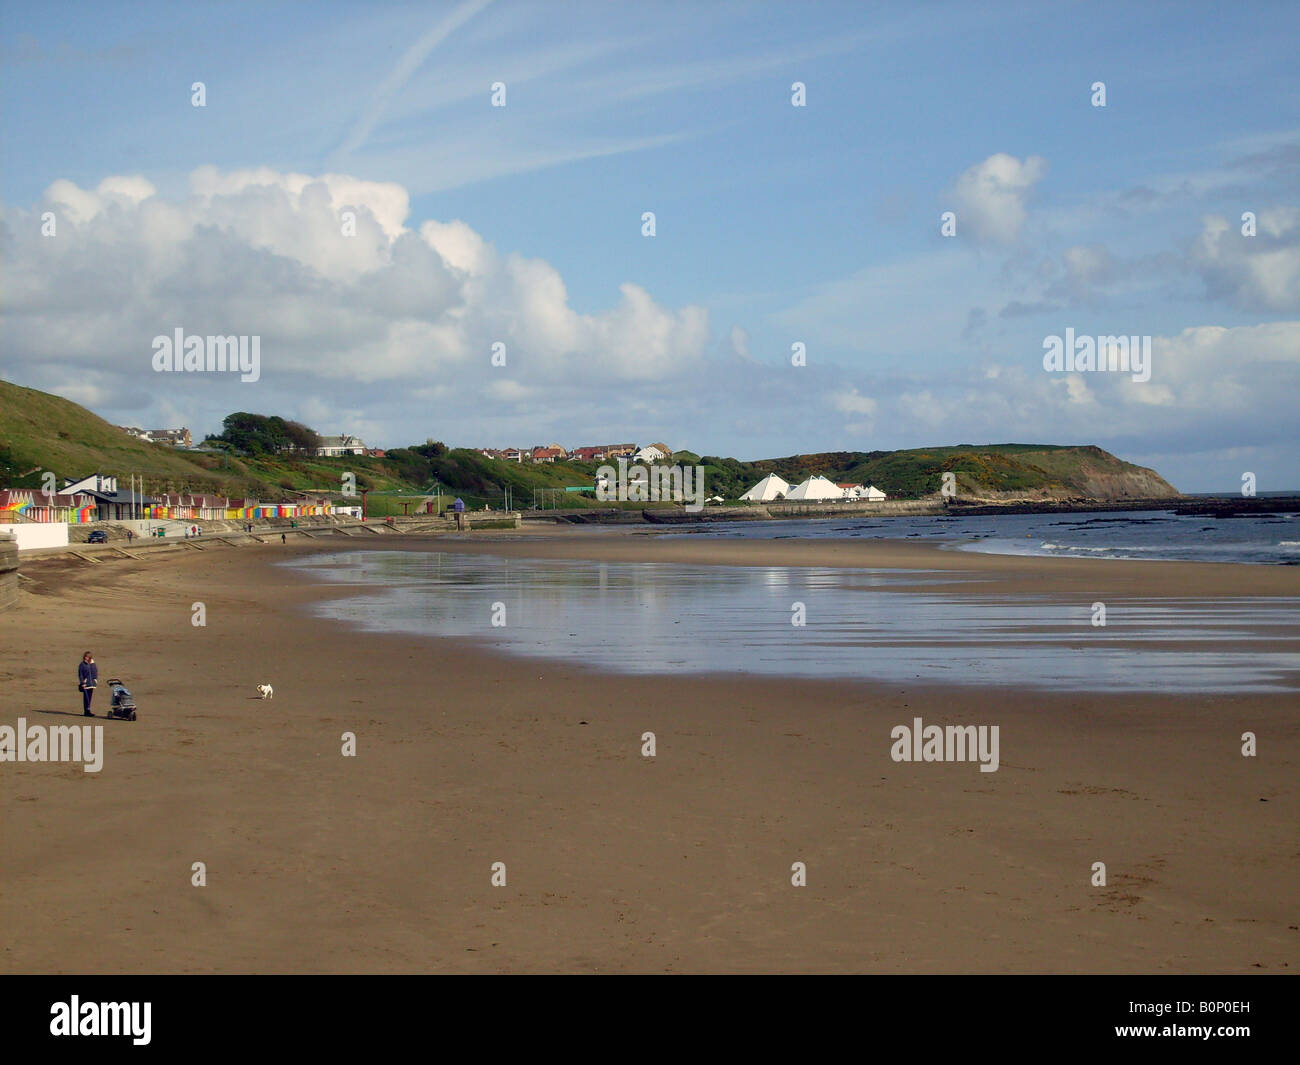 General view of Scarborough North Bay beach, Scarborough, North Yorkshire, England. Stock Photo